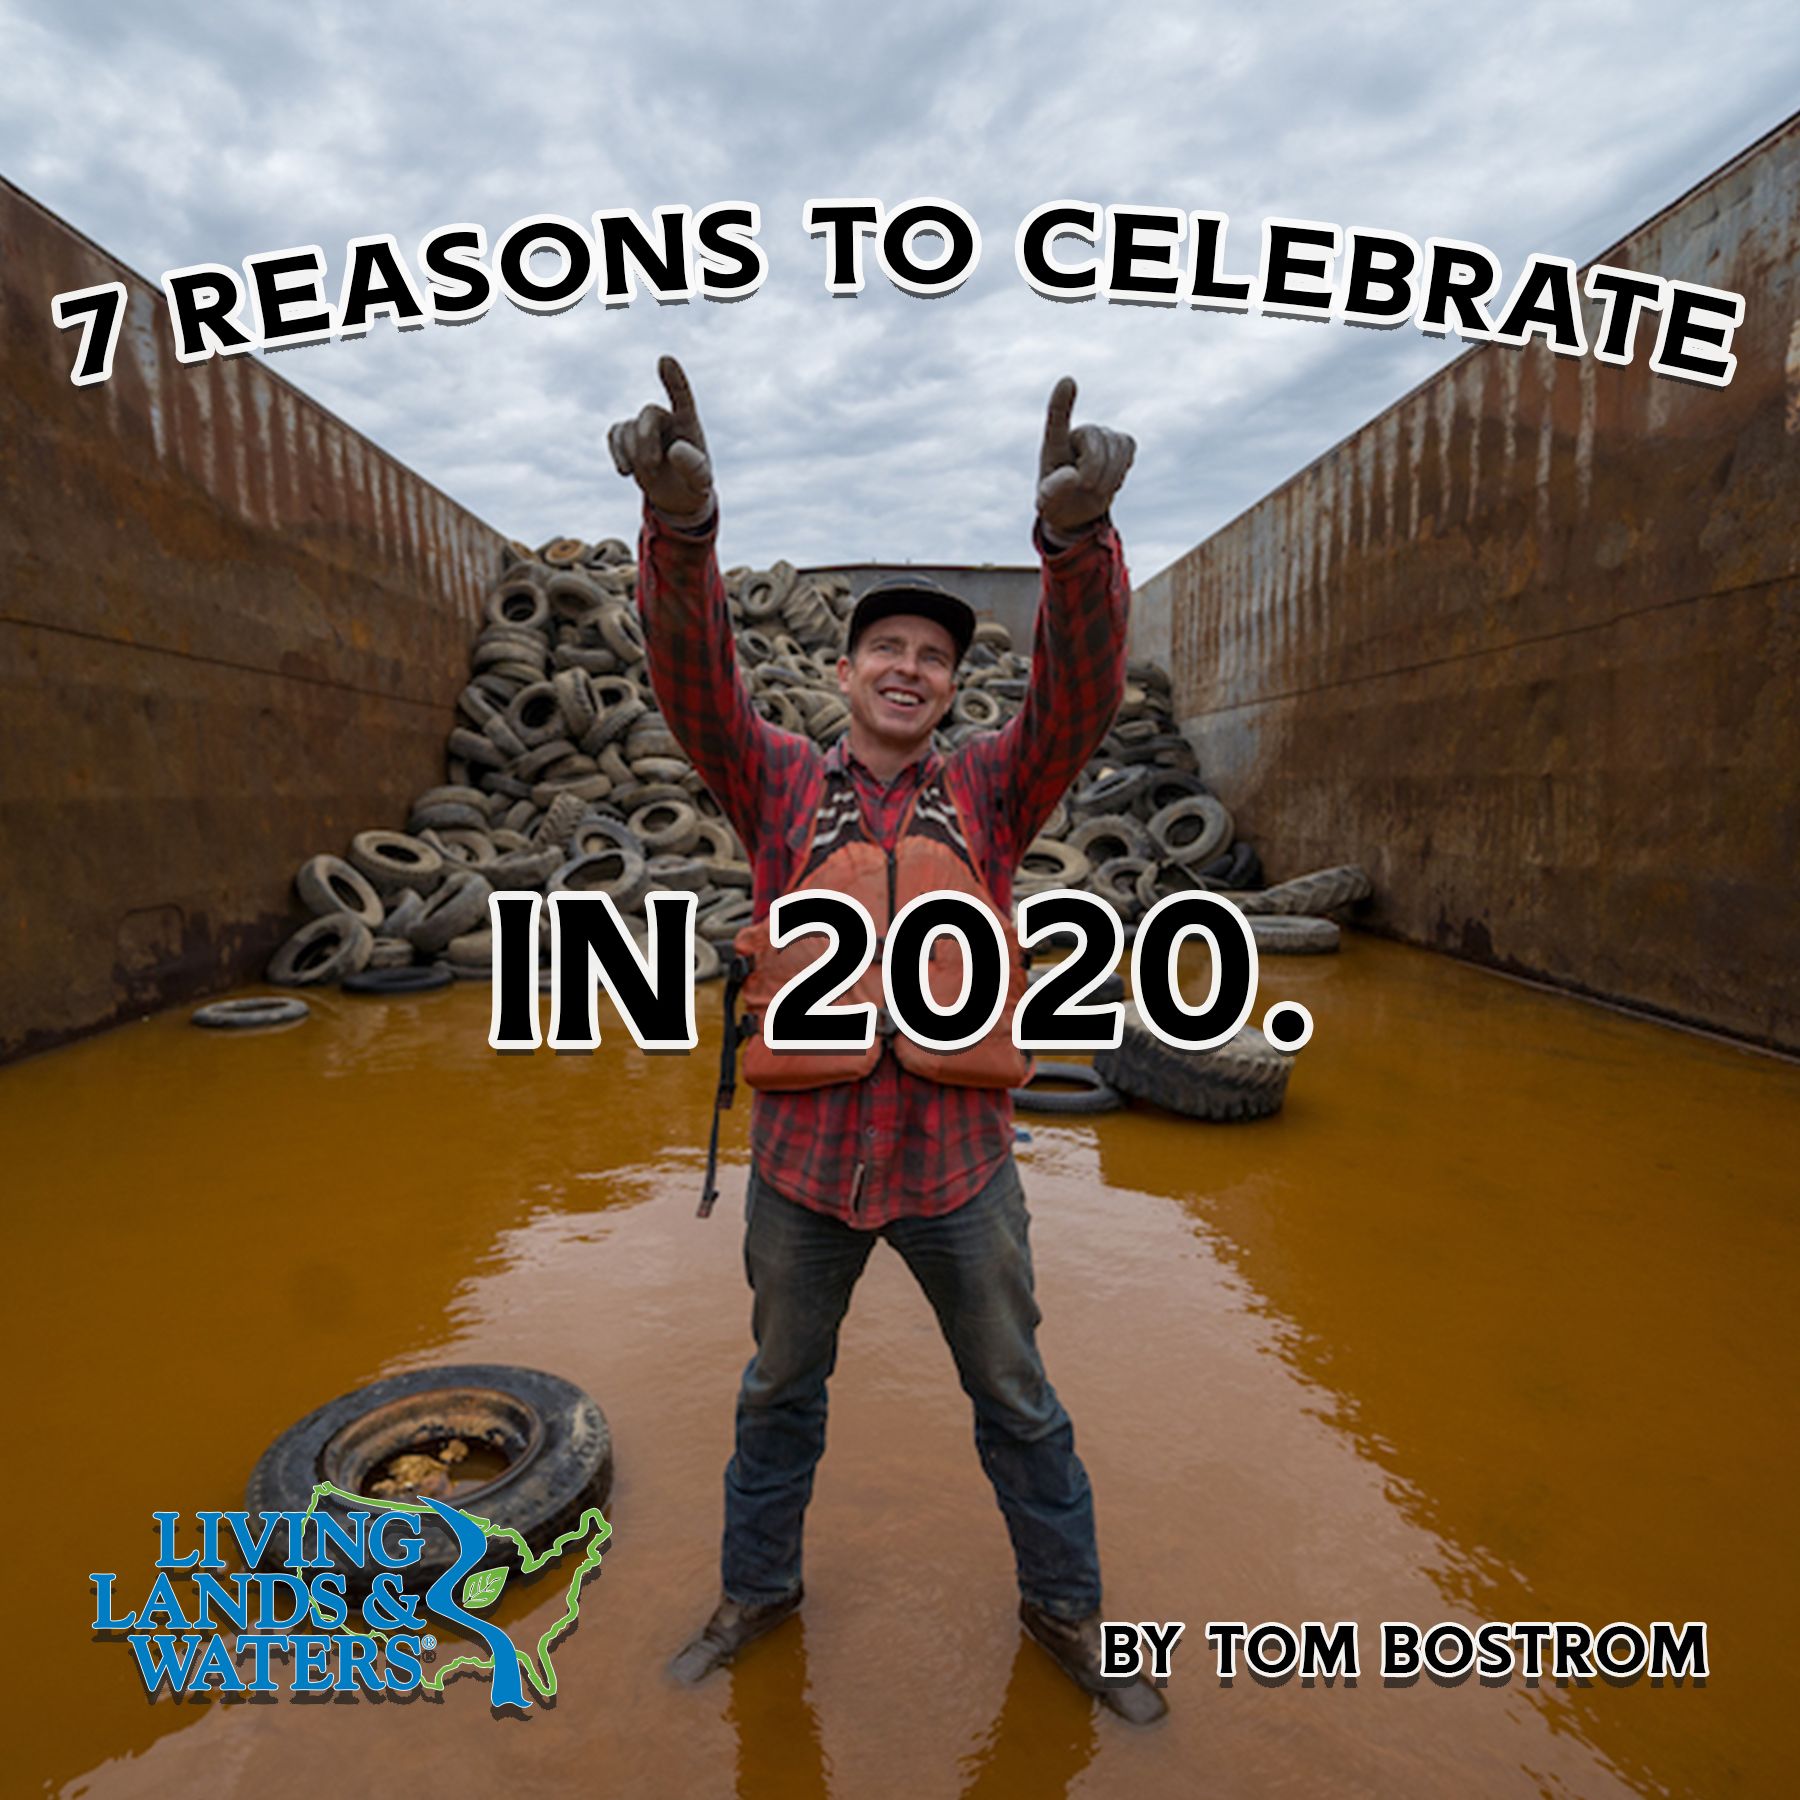 7 Reasons to Celebrate in 2020